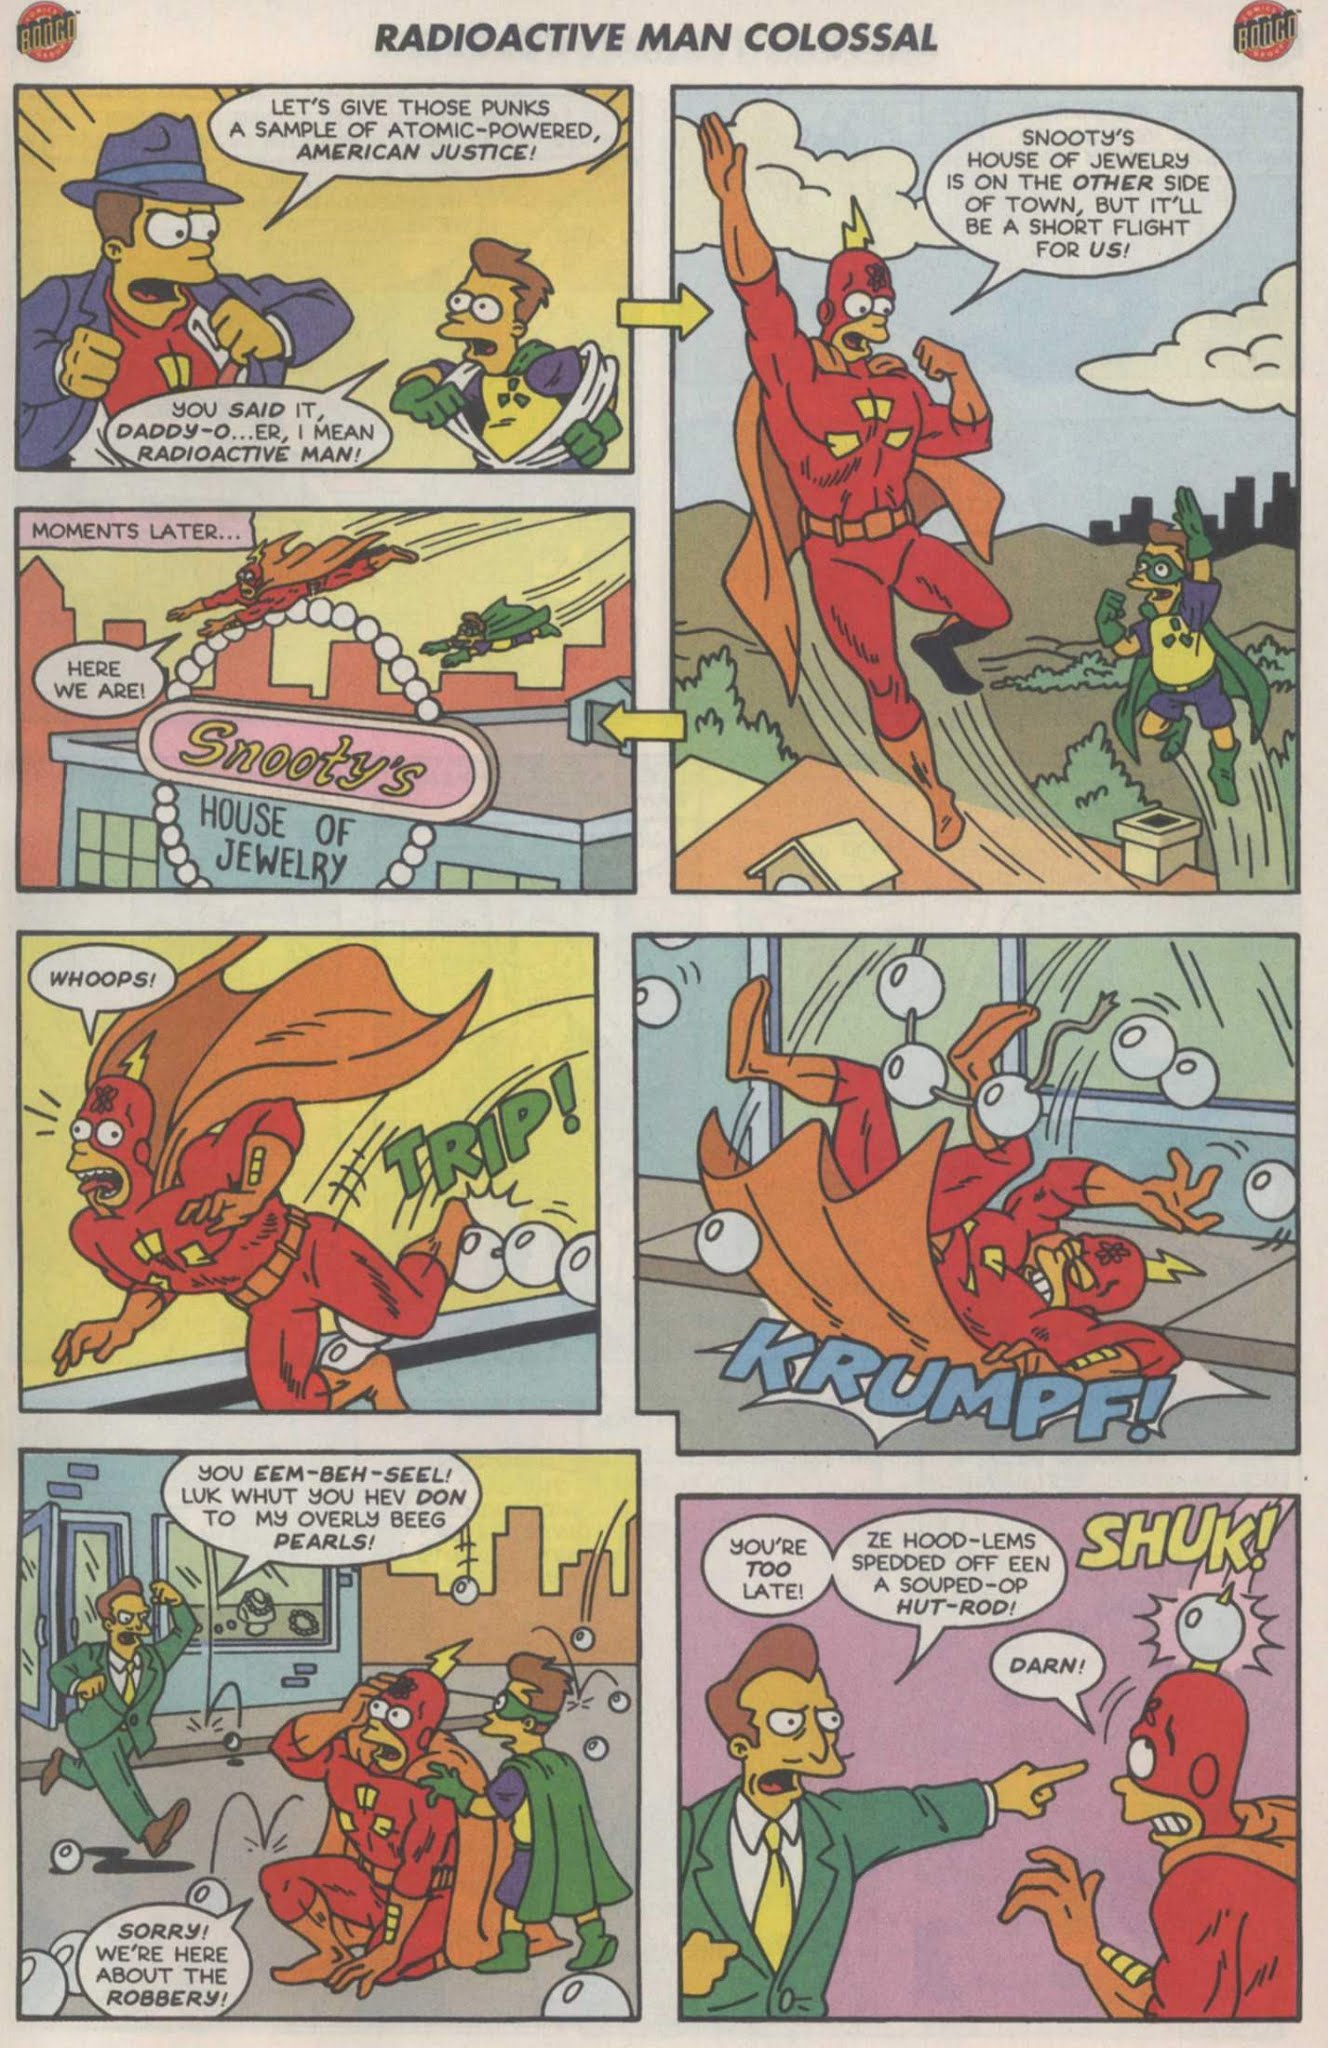 Read online Radioactive Man 80 pg. Colossal comic -  Issue # Full - 19